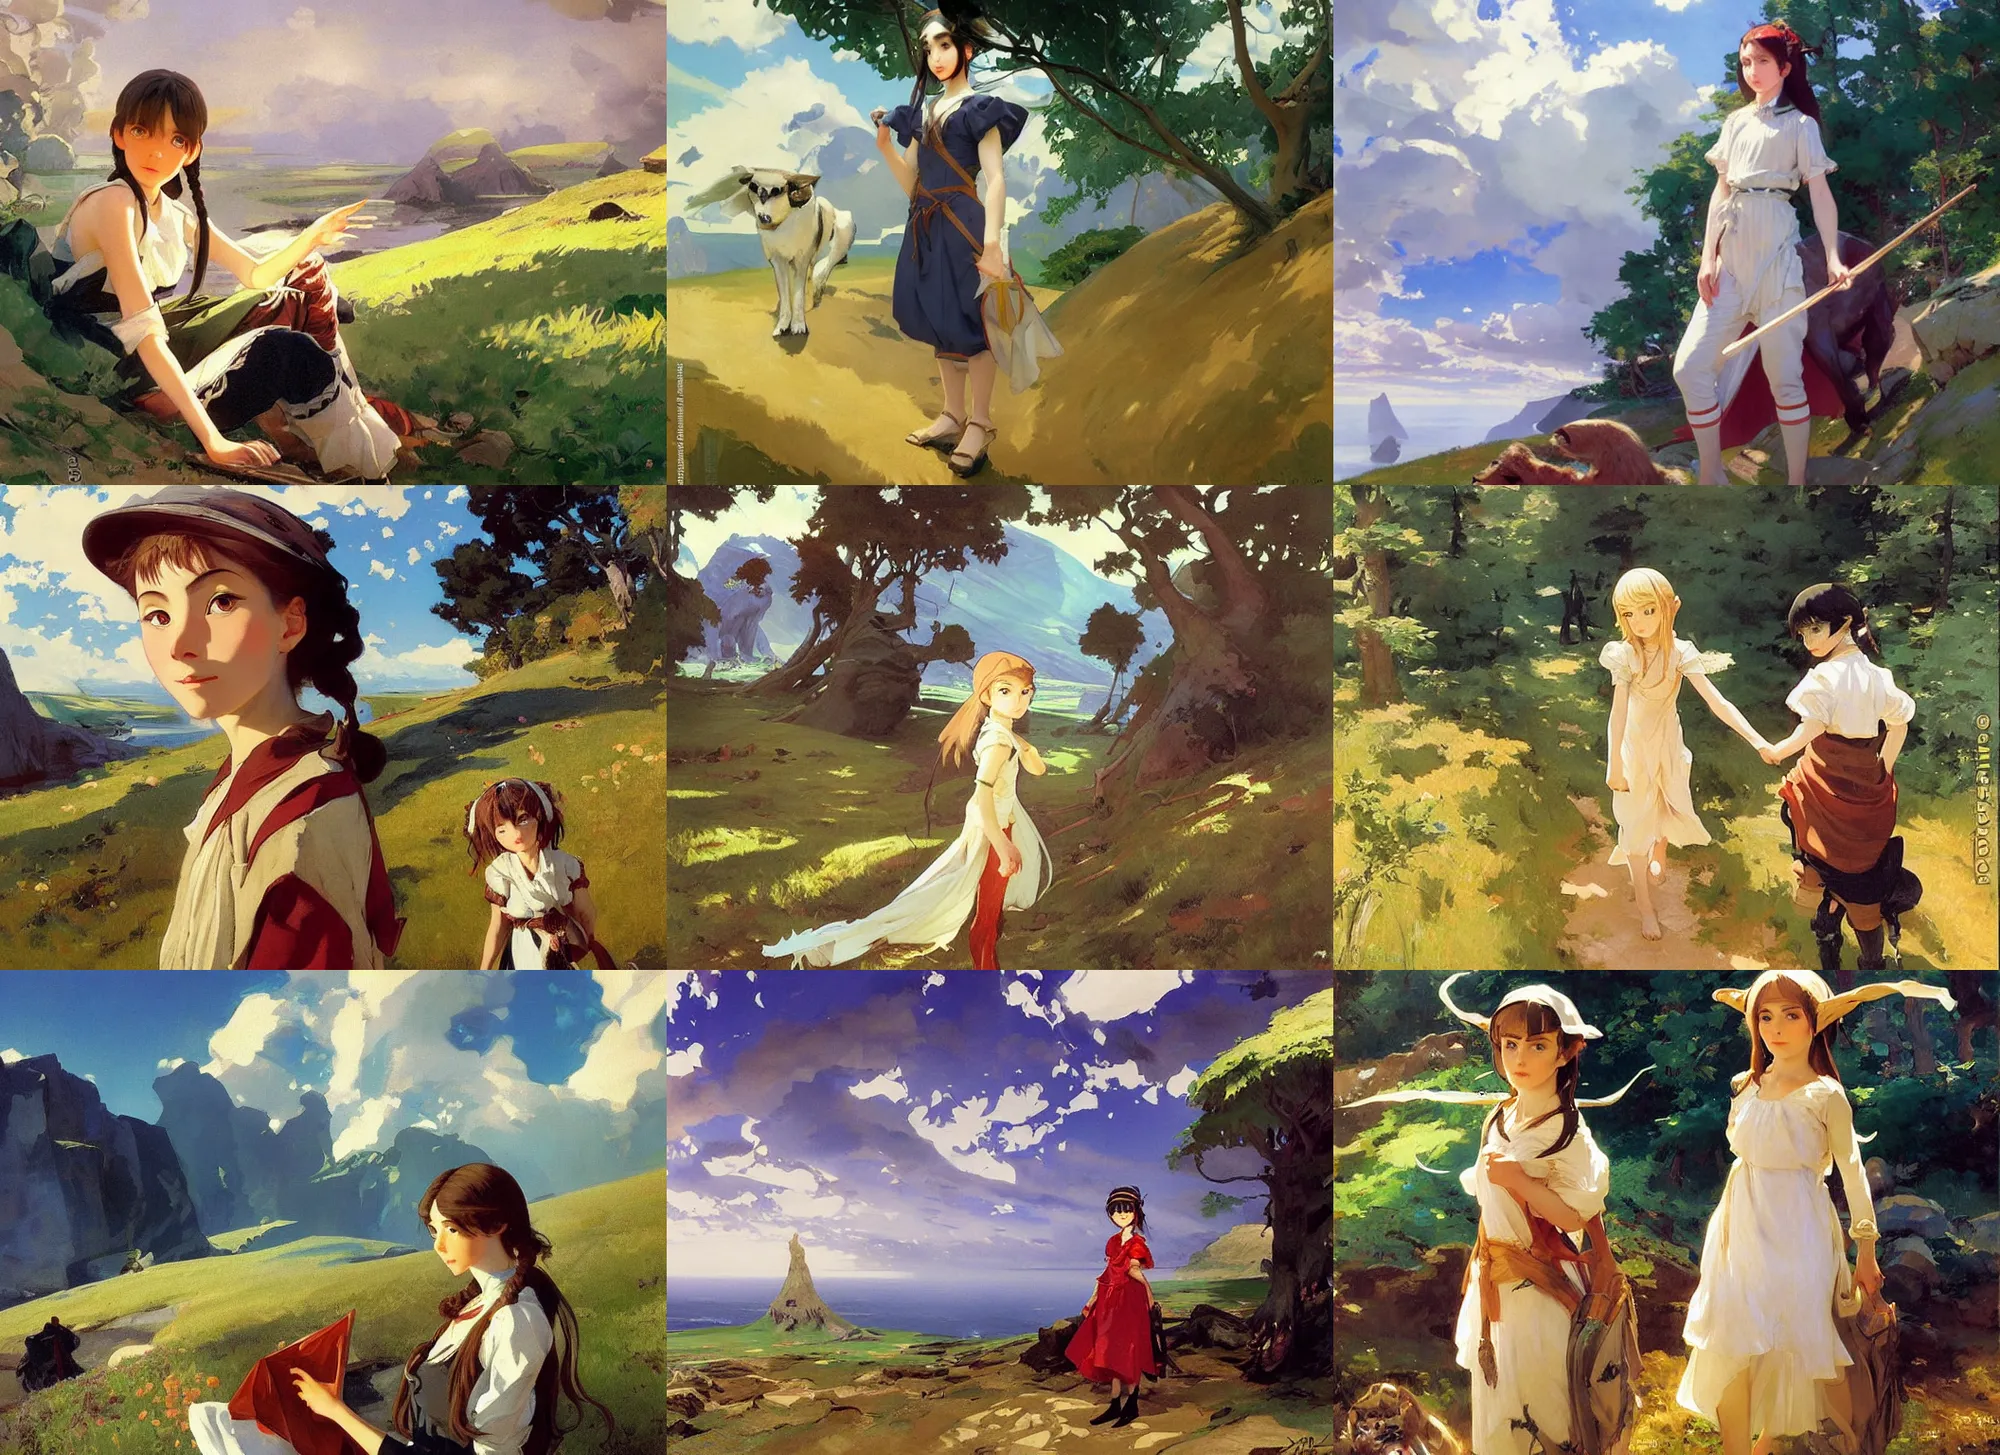 Prompt: painting by sargent and leyendecker and greg hildebrandt savrasov levitan polenov, studio ghibly anime style young girl mononoke, middle earth flat landscape faroe masterpiece